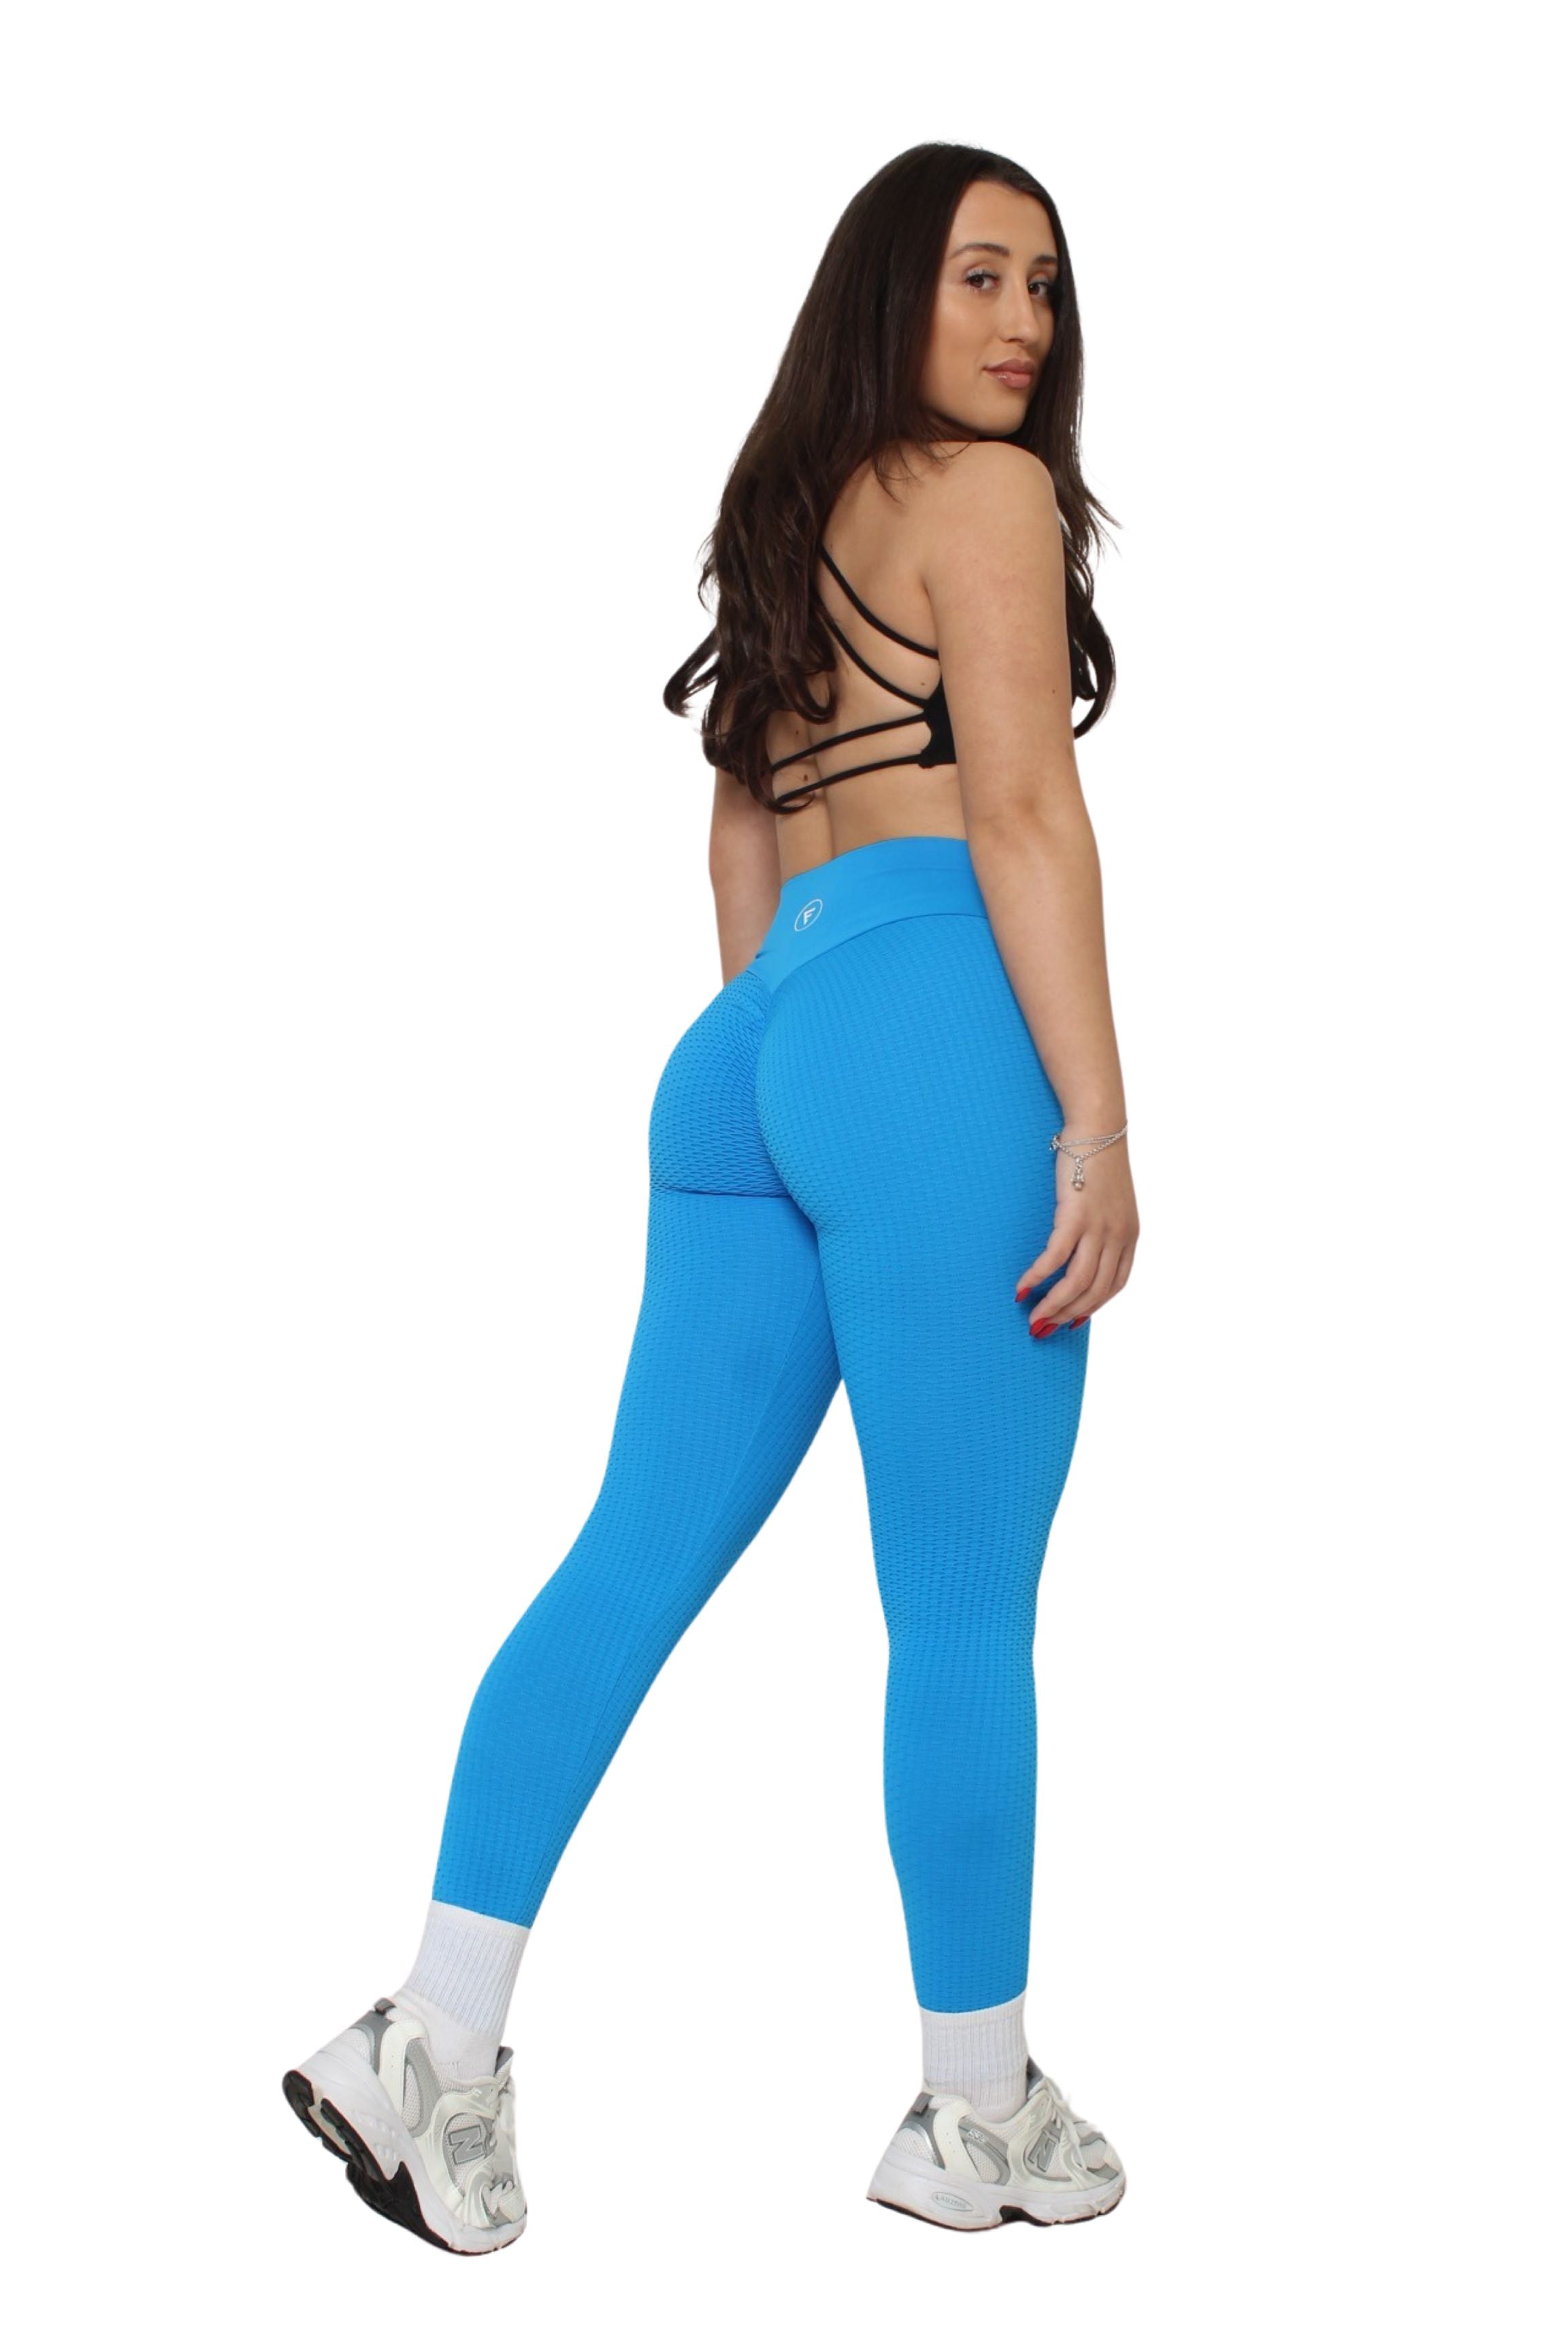 Scrunch Butt Leggings With Flap Pockets , Gym and Active Leggings